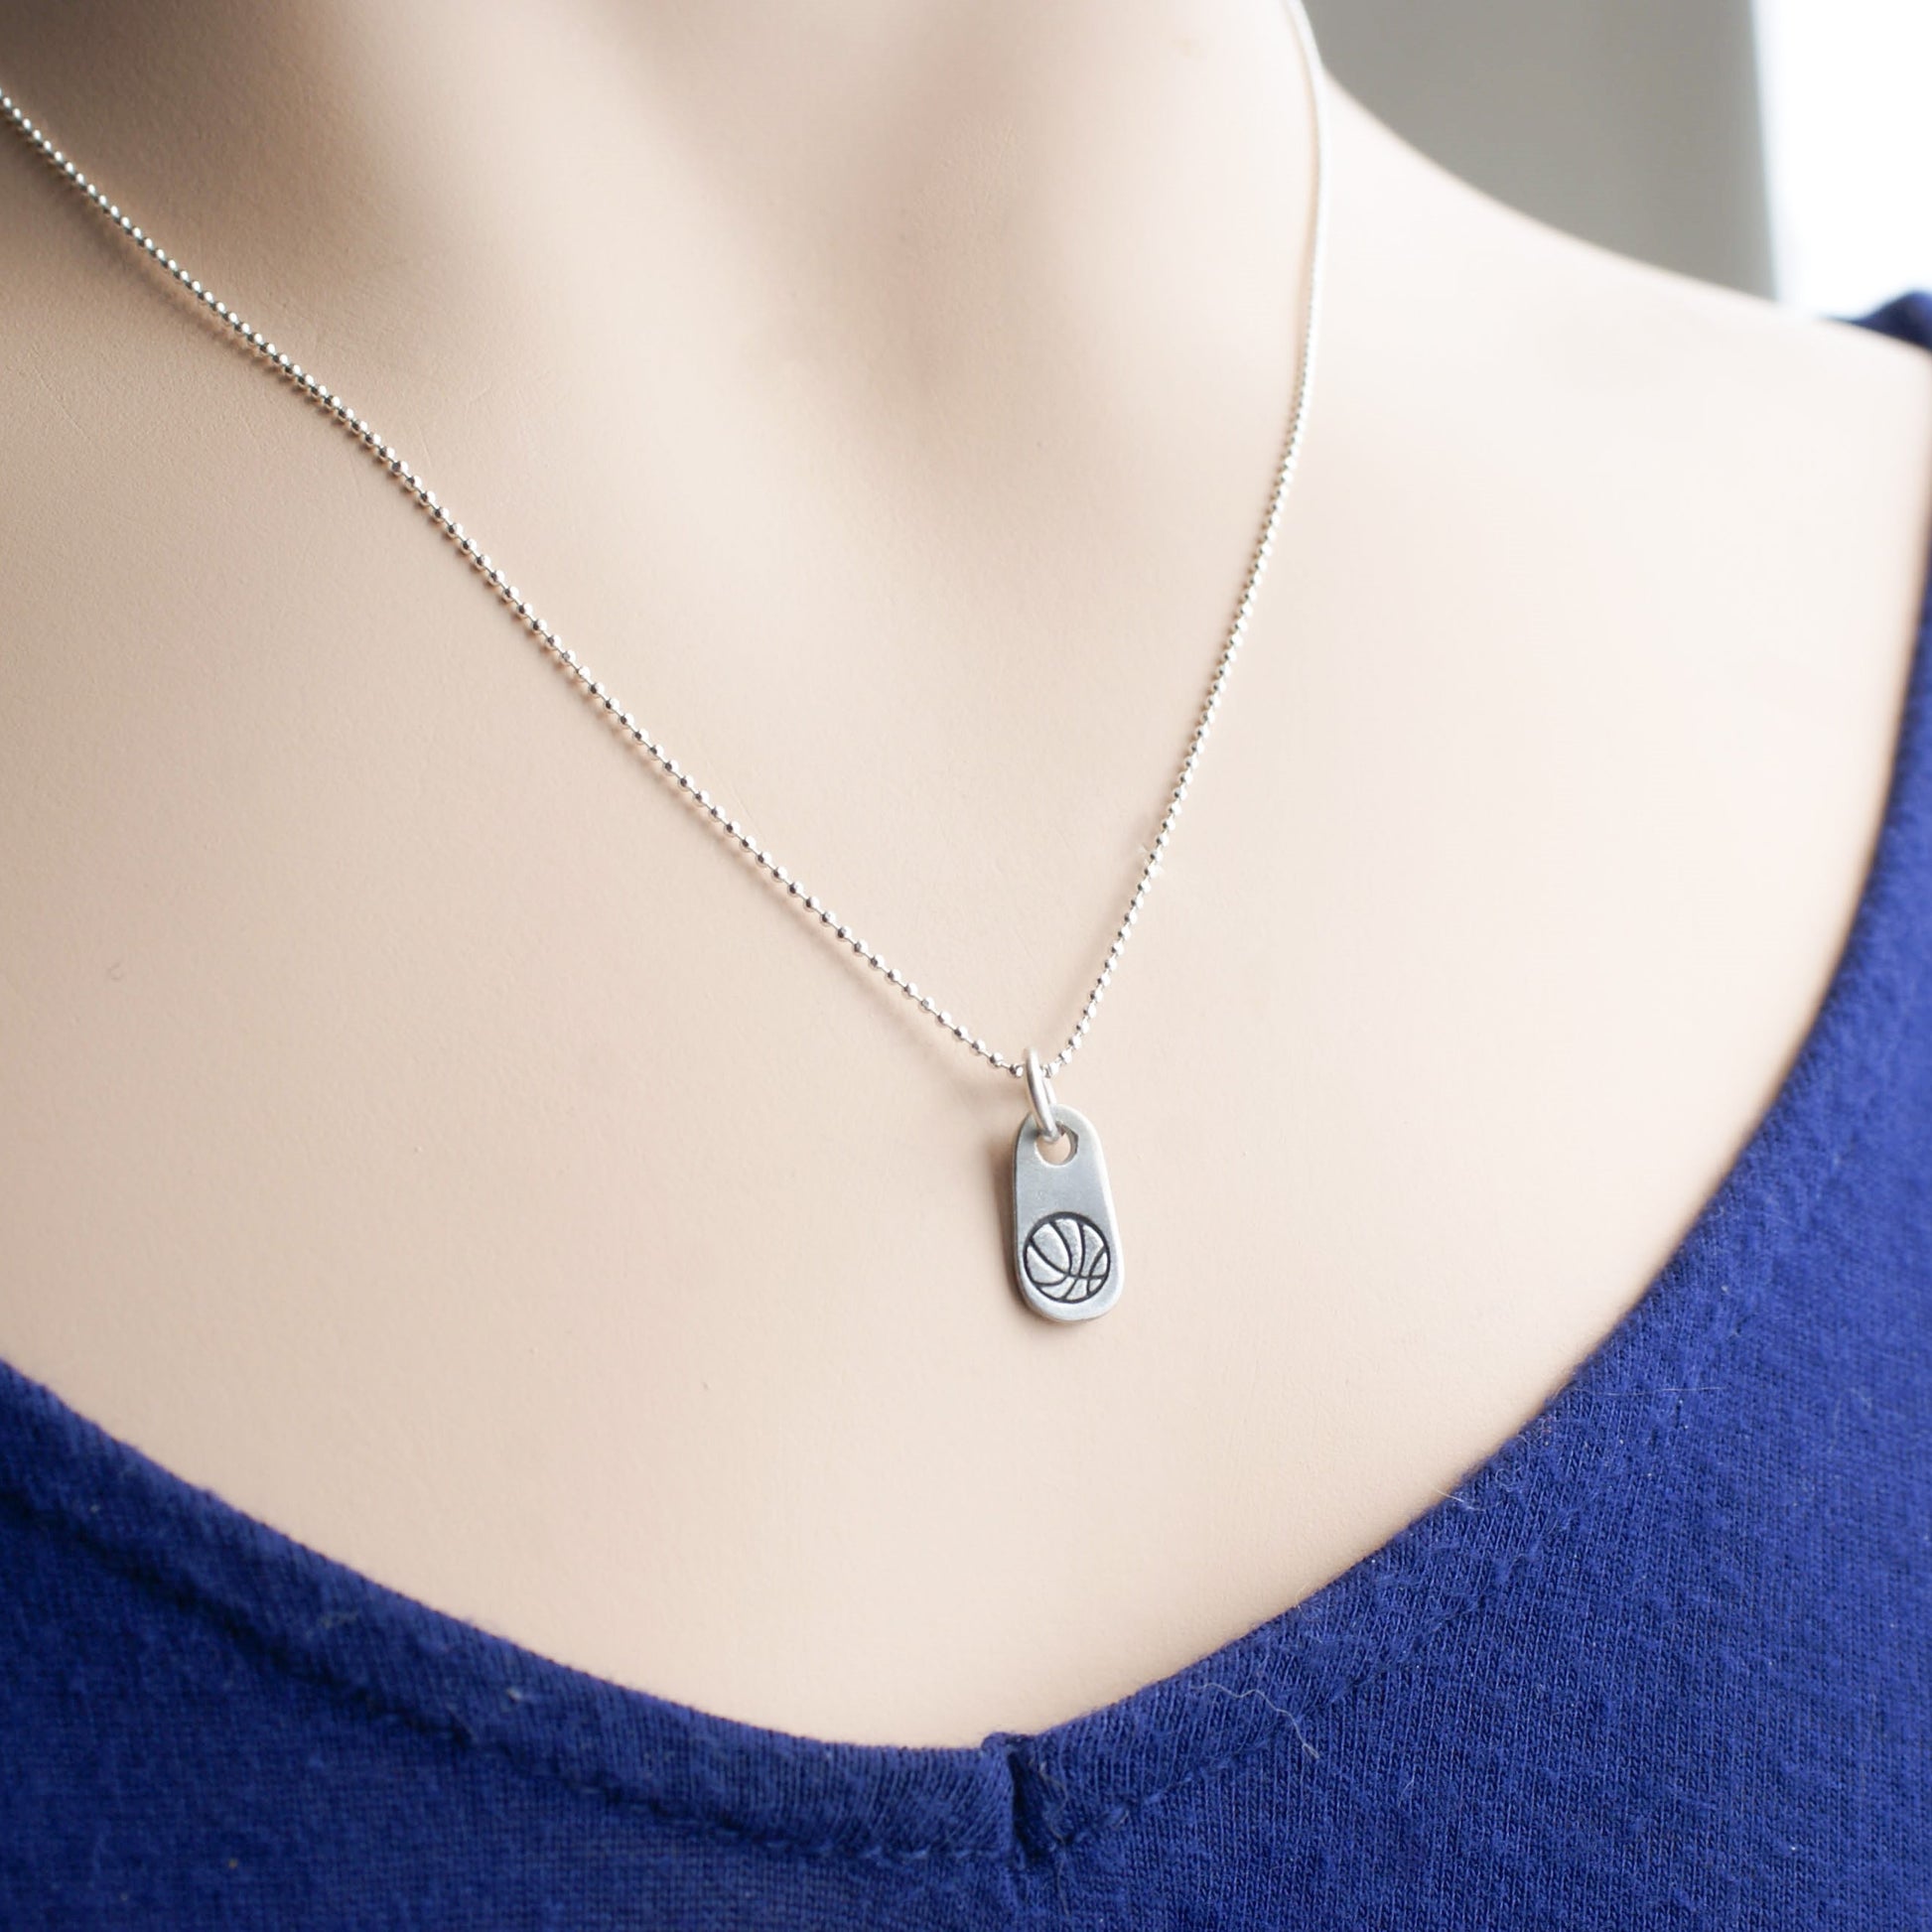 Silver basketball mom necklace in artisan pewter on neck